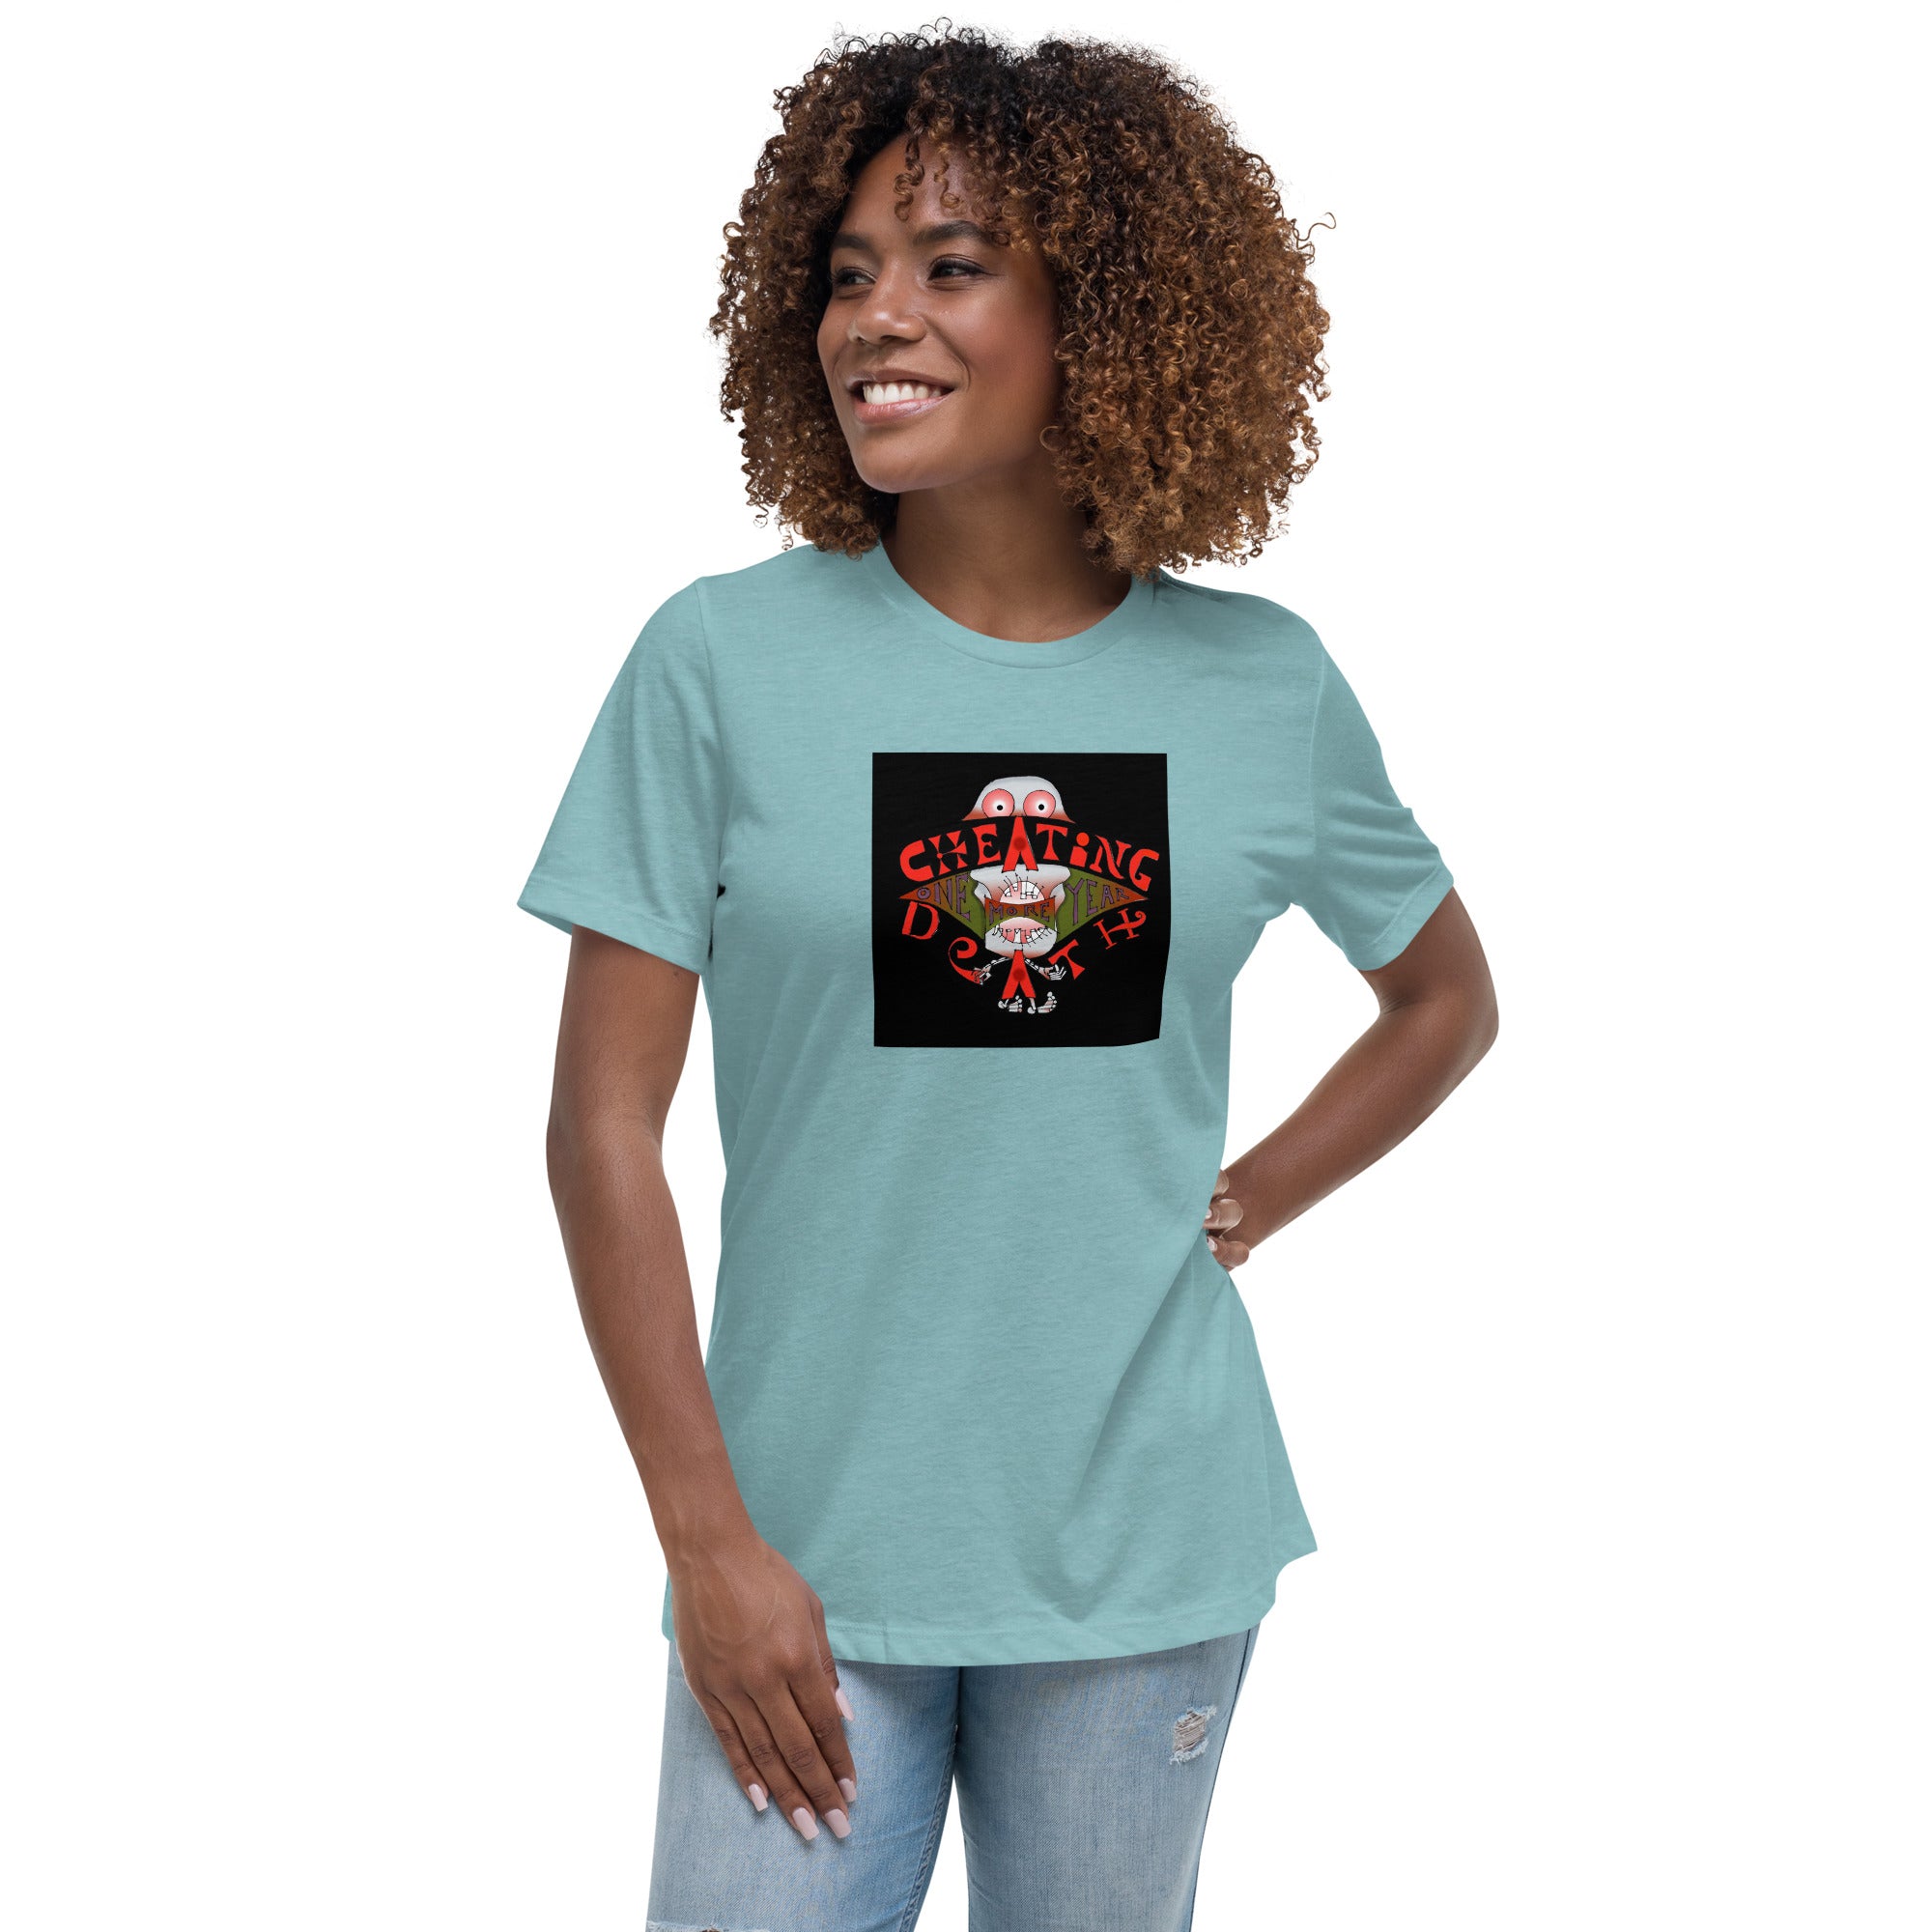 Women's Relaxed T-Shirt, Sundries for Time